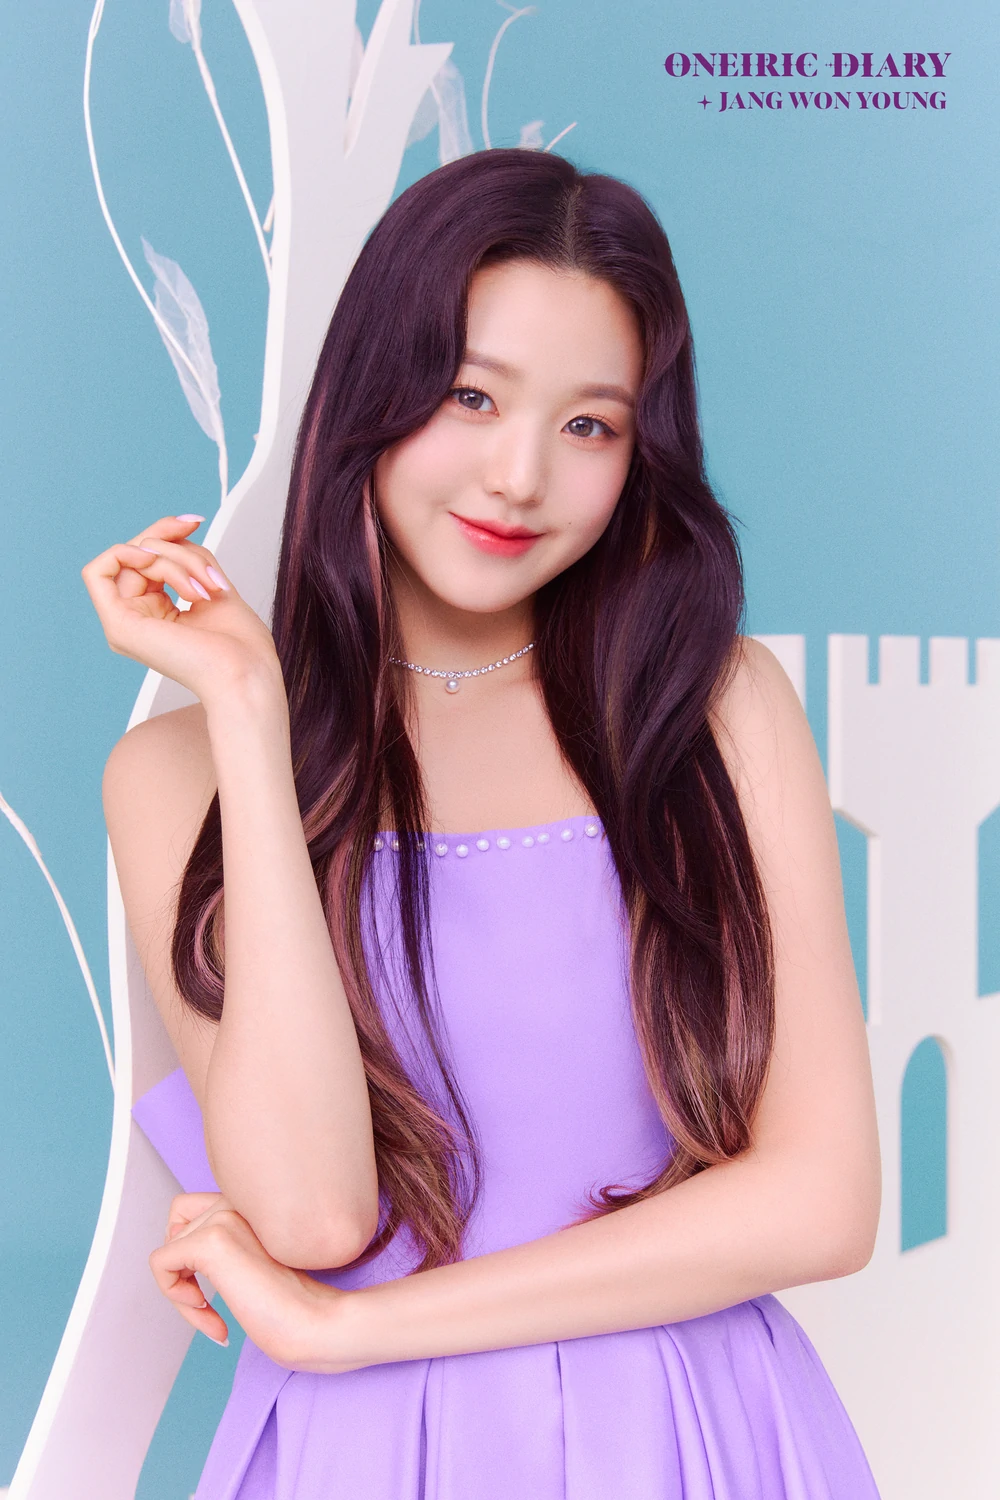 IZ*ONE Oneiric Diary Wonyoung Concept Teaser Picture Image Photo Kpop K-Concept 4